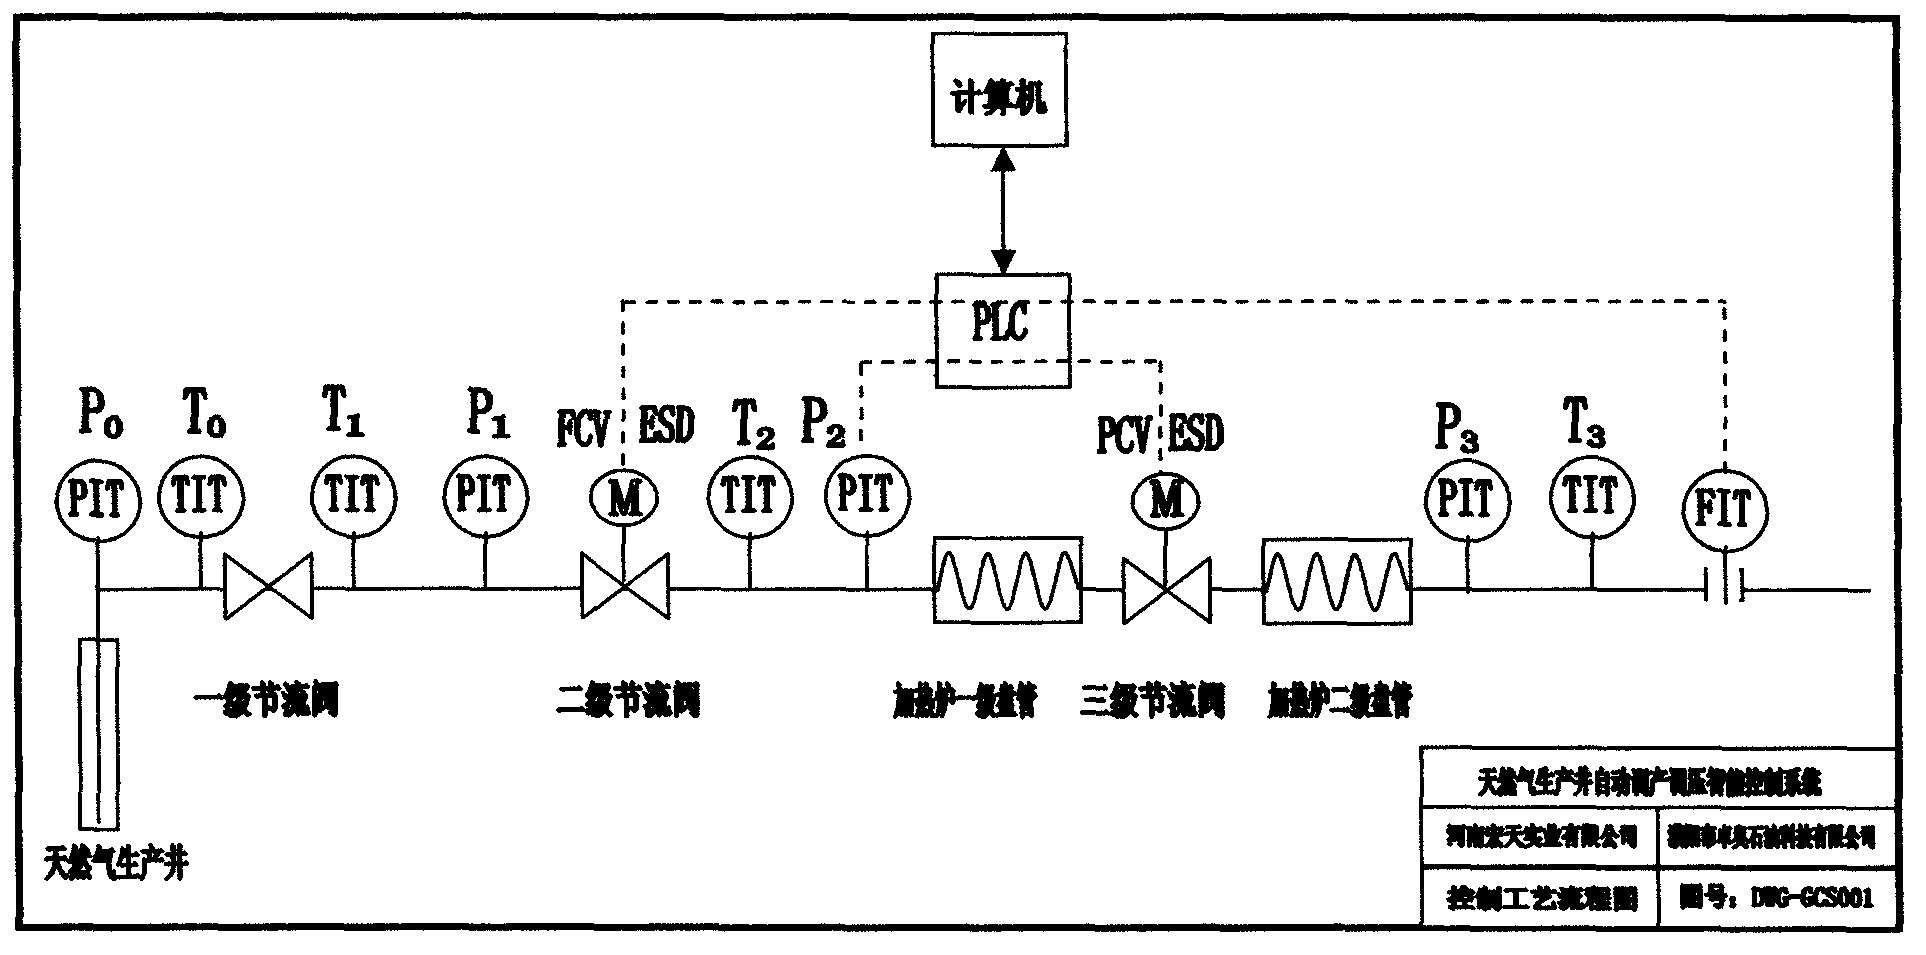 Natural gas producing well production and pressure automatically adjusting intelligent control system